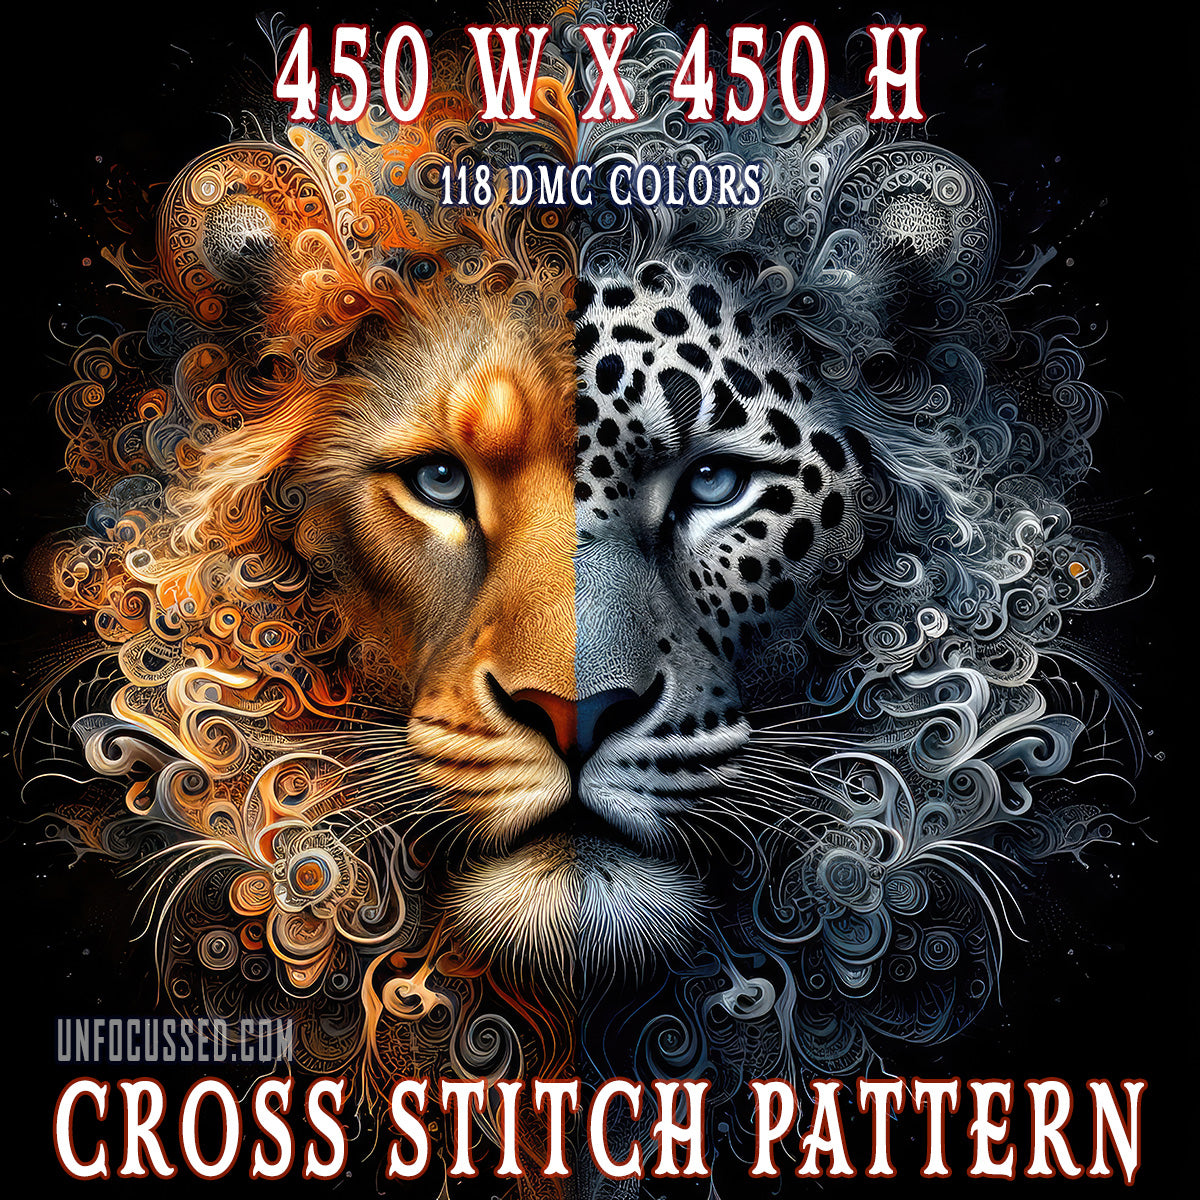 Fusion of the Feral Cross Stitch Pattern